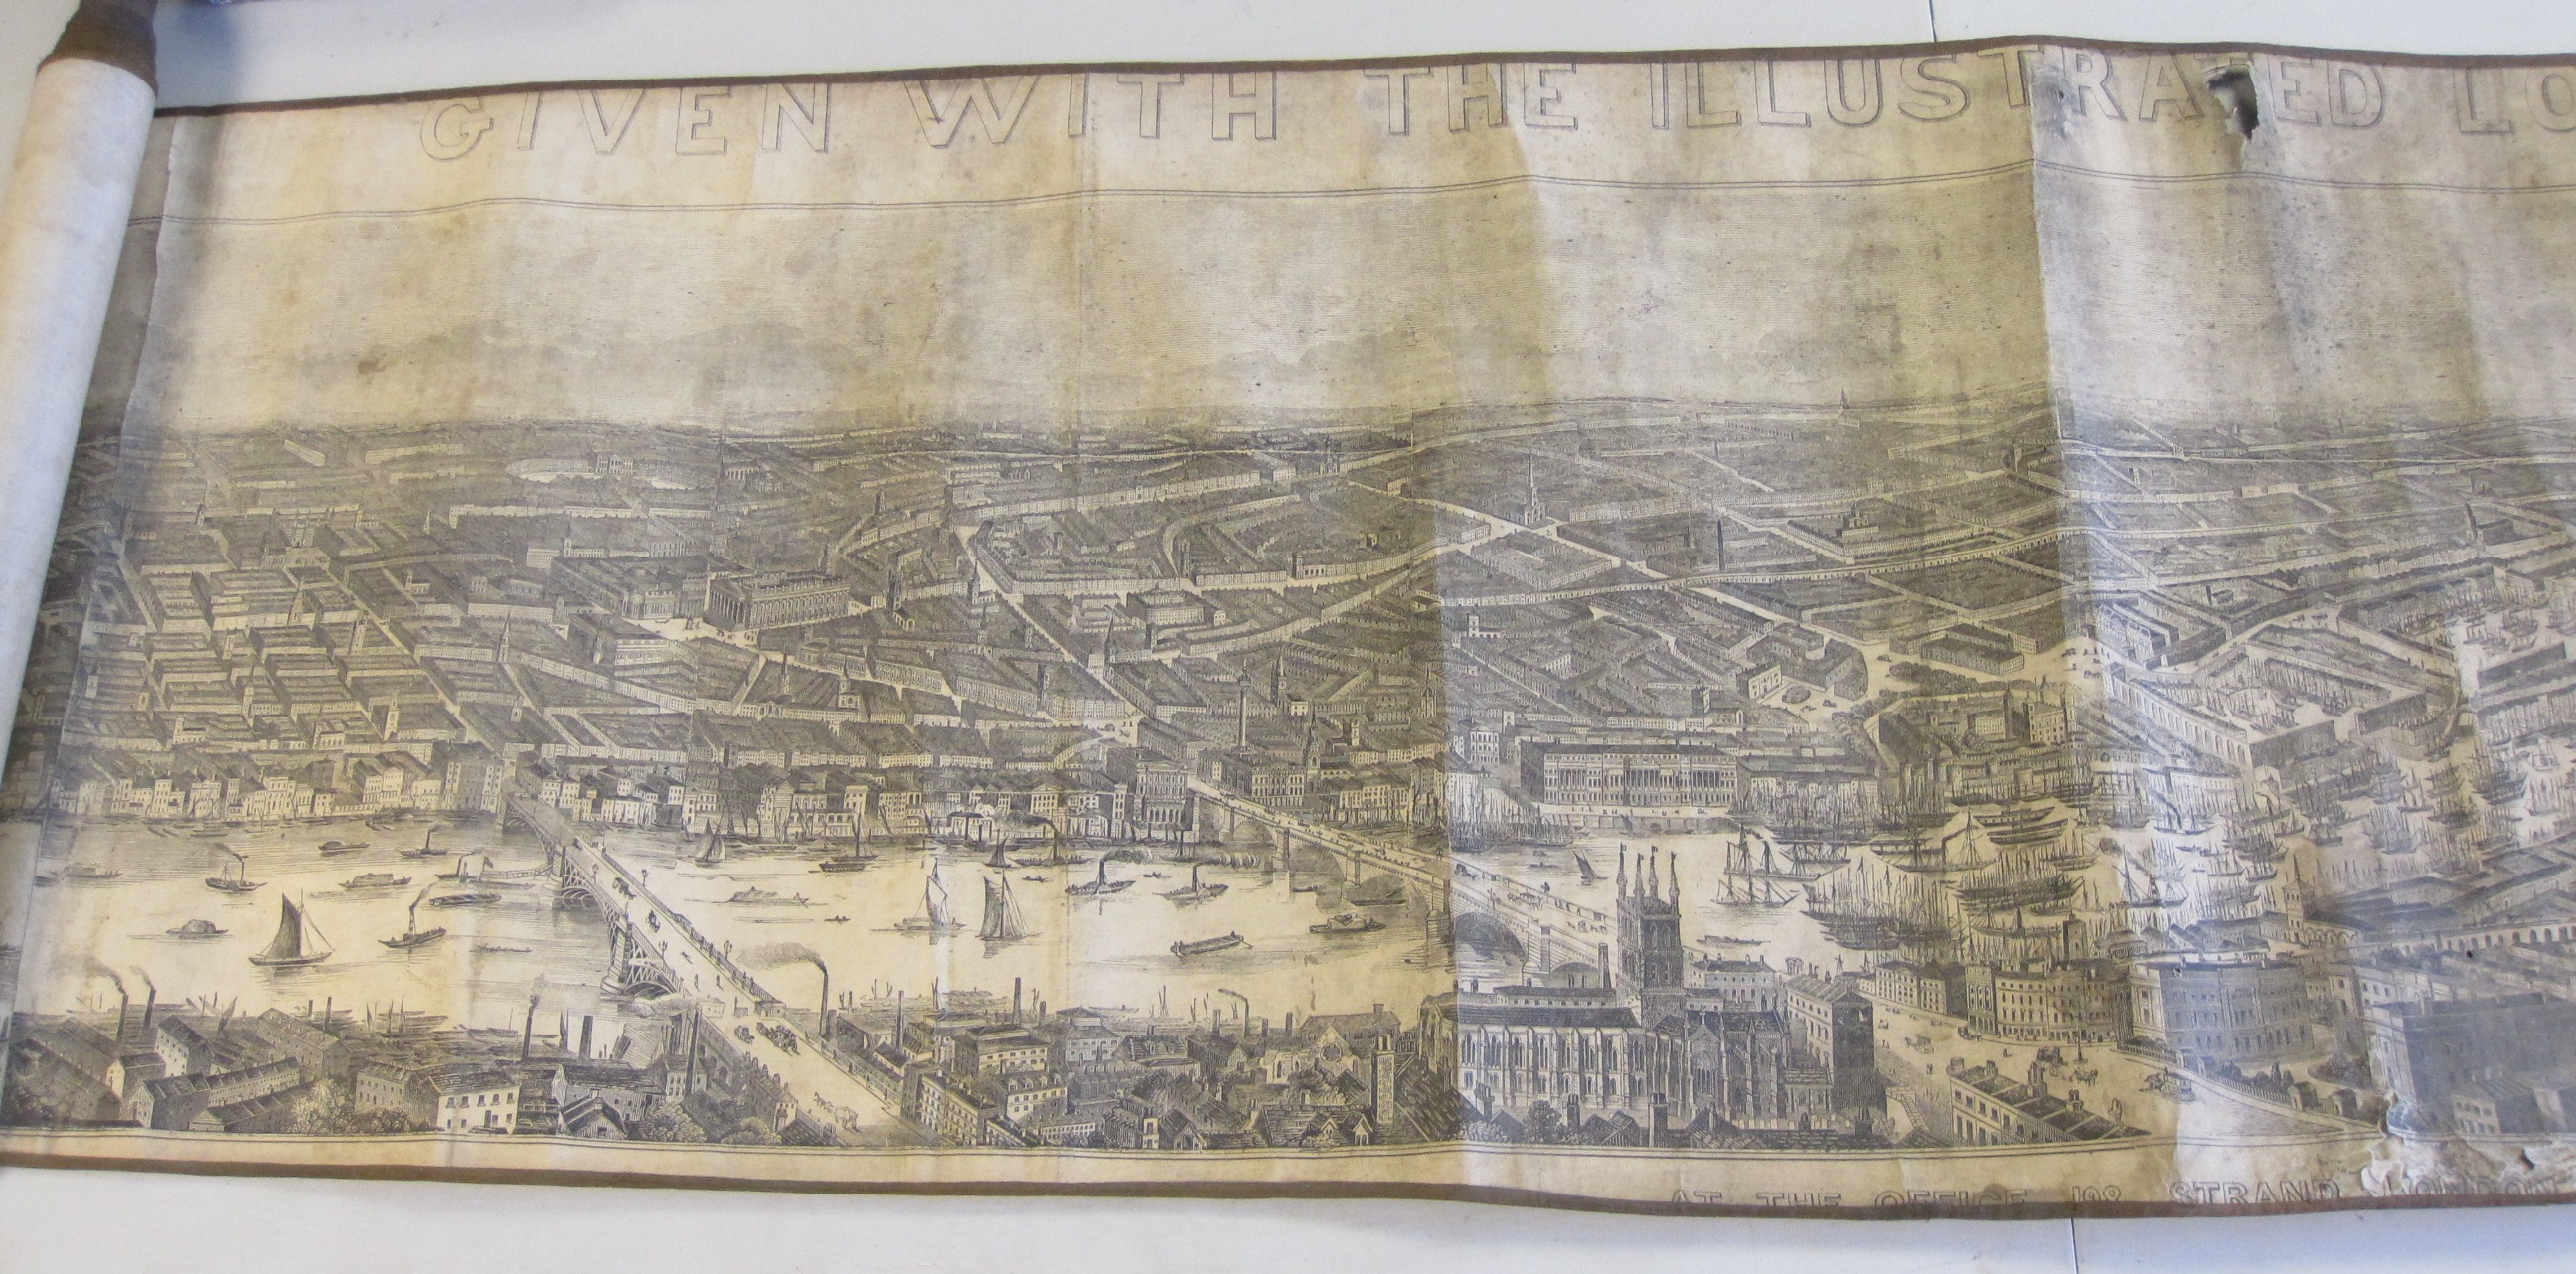 An Illustrated London News Panoramic View of River Thames dated 1845, SMYTH, laid on linen, 7 x 6in, - Image 3 of 4